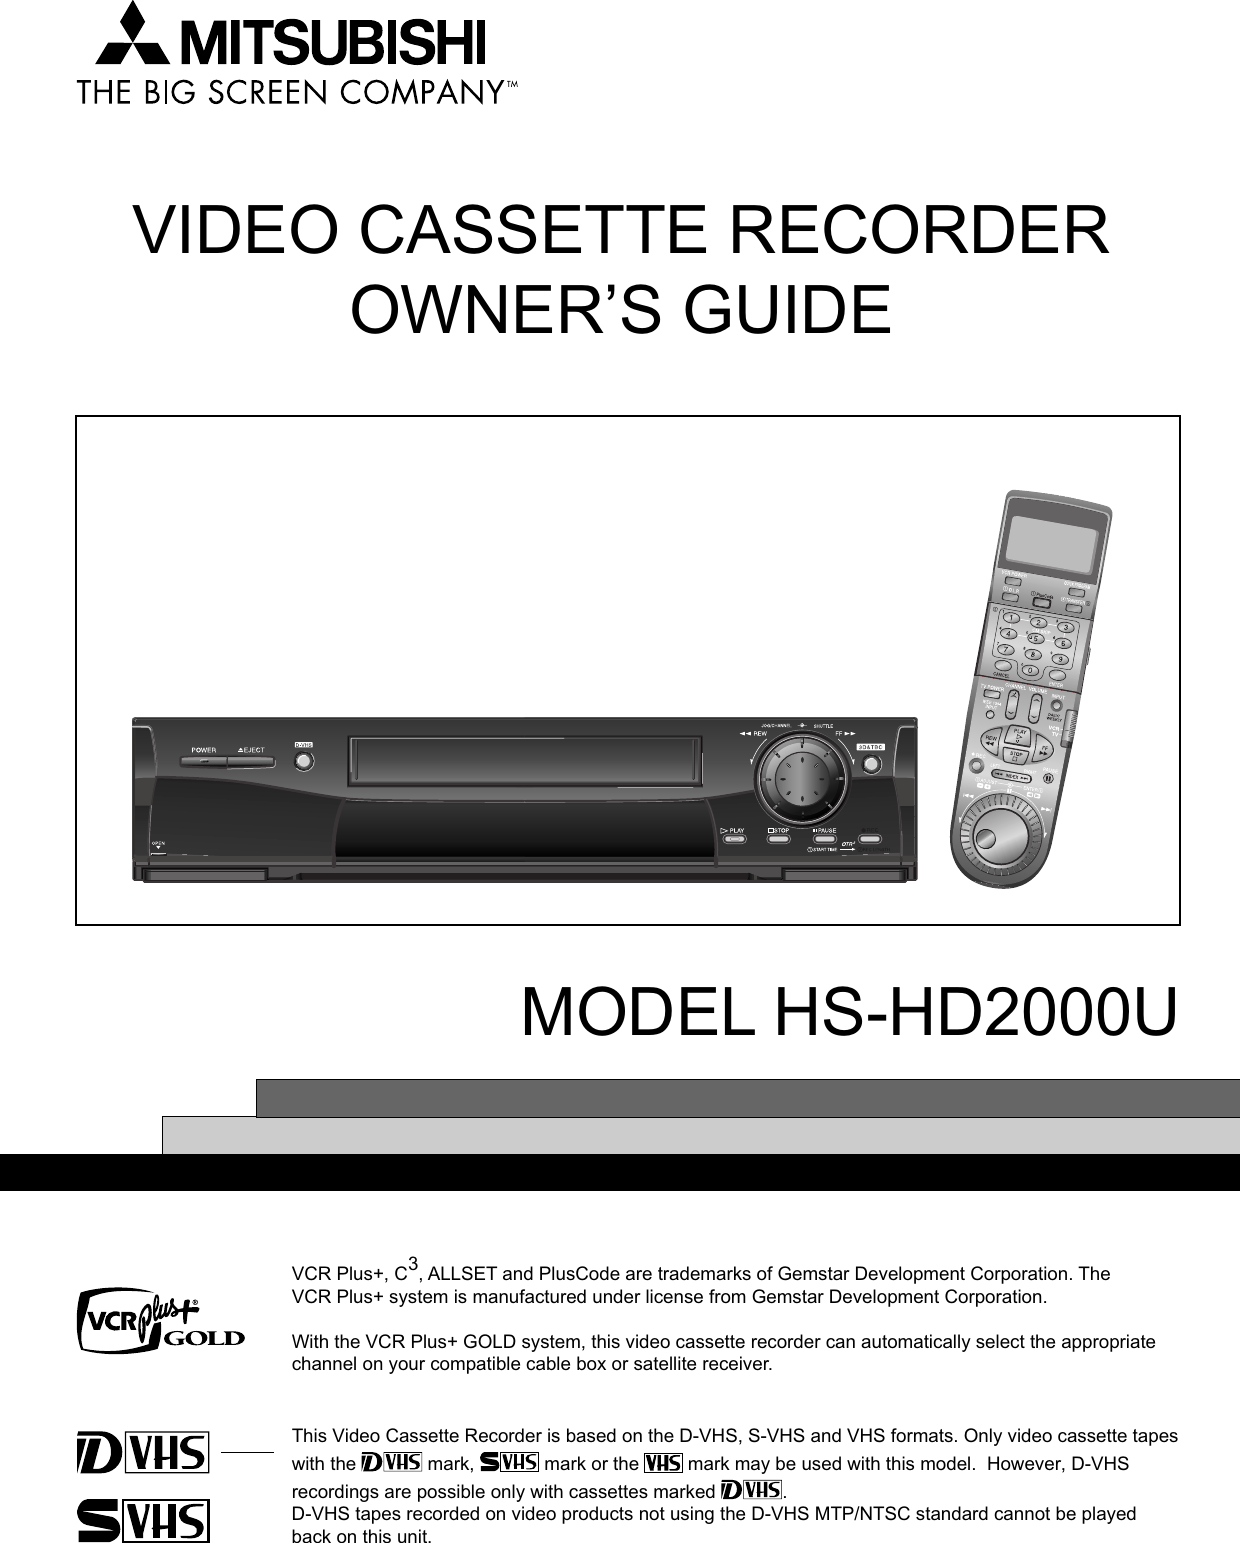 VIDEO CASSETTE RECORDEROWNER’S GUIDEMODEL HS-HD2000UThis Video Cassette Recorder is based on the D-VHS, S-VHS and VHS formats. Only video cassette tapeswith the   mark,   mark or the   mark may be used with this model.  However, D-VHSrecordings are possible only with cassettes marked  .D-VHS tapes recorded on video products not using the D-VHS MTP/NTSC standard cannot be playedback on this unit.VCR Plus+, C3, ALLSET and PlusCode are trademarks of Gemstar Development Corporation. TheVCR Plus+ system is manufactured under license from Gemstar Development Corporation.With the VCR Plus+ GOLD system, this video cassette recorder can automatically select the appropriatechannel on your compatible cable box or satellite receiver.